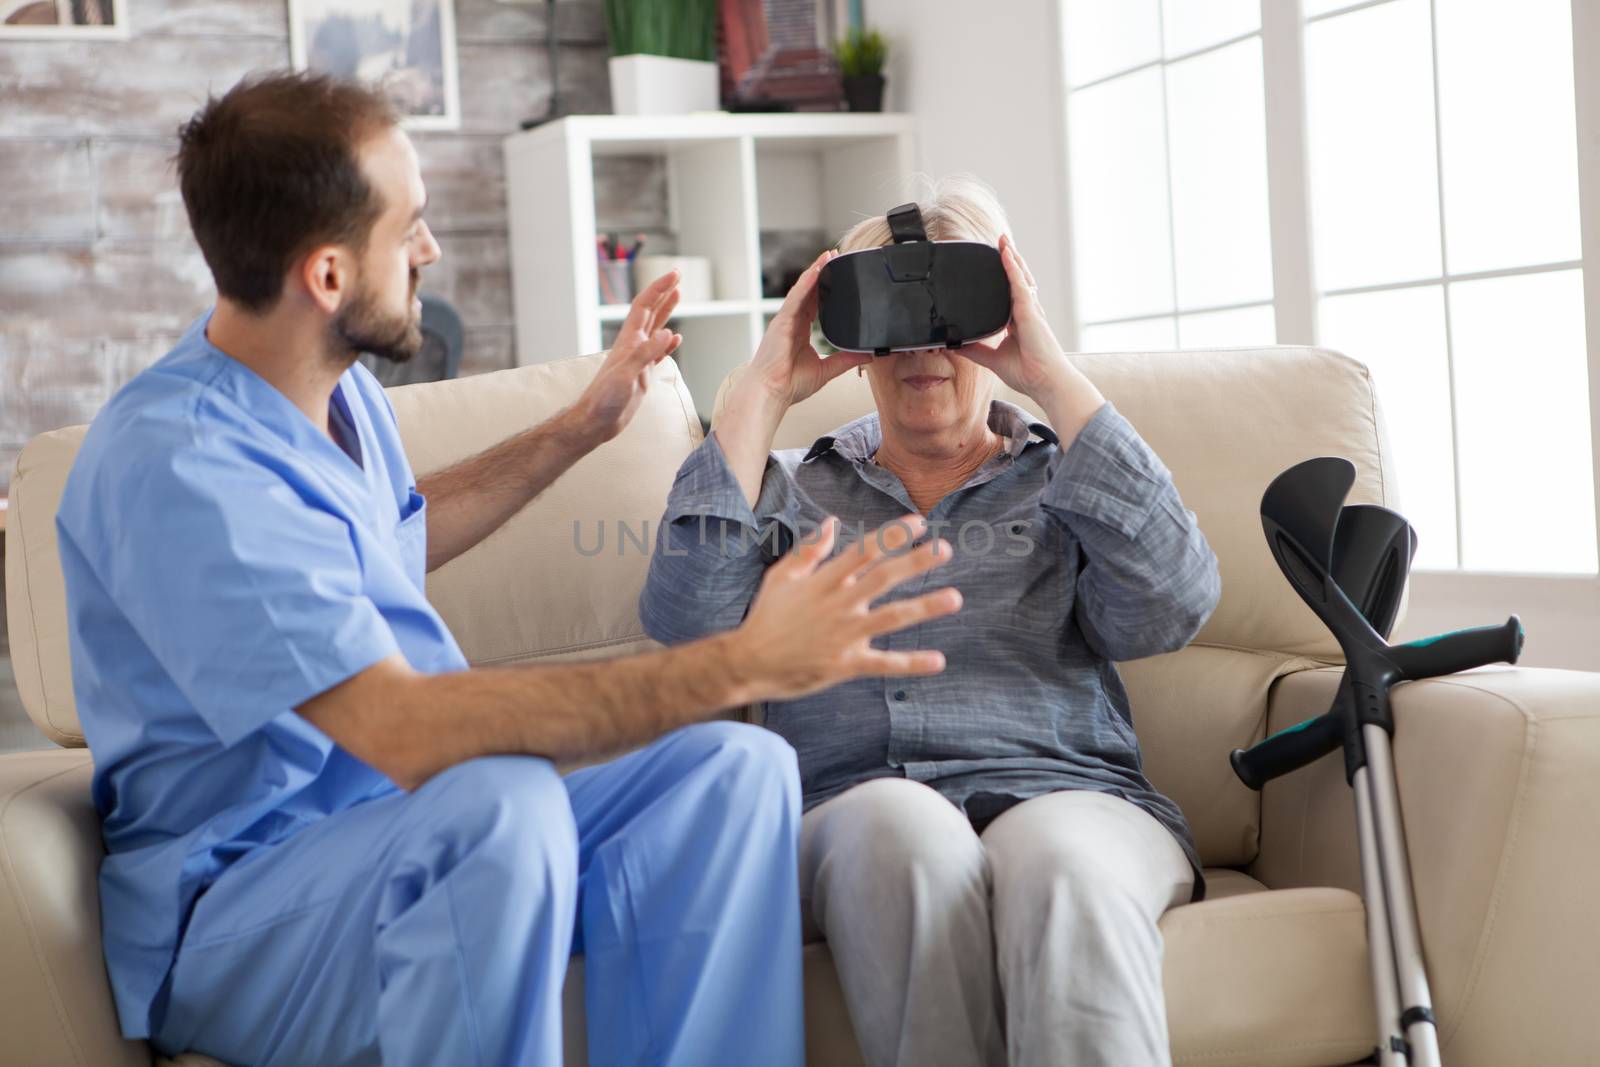 Older patient using virtual reality glasses in nursing home by DCStudio